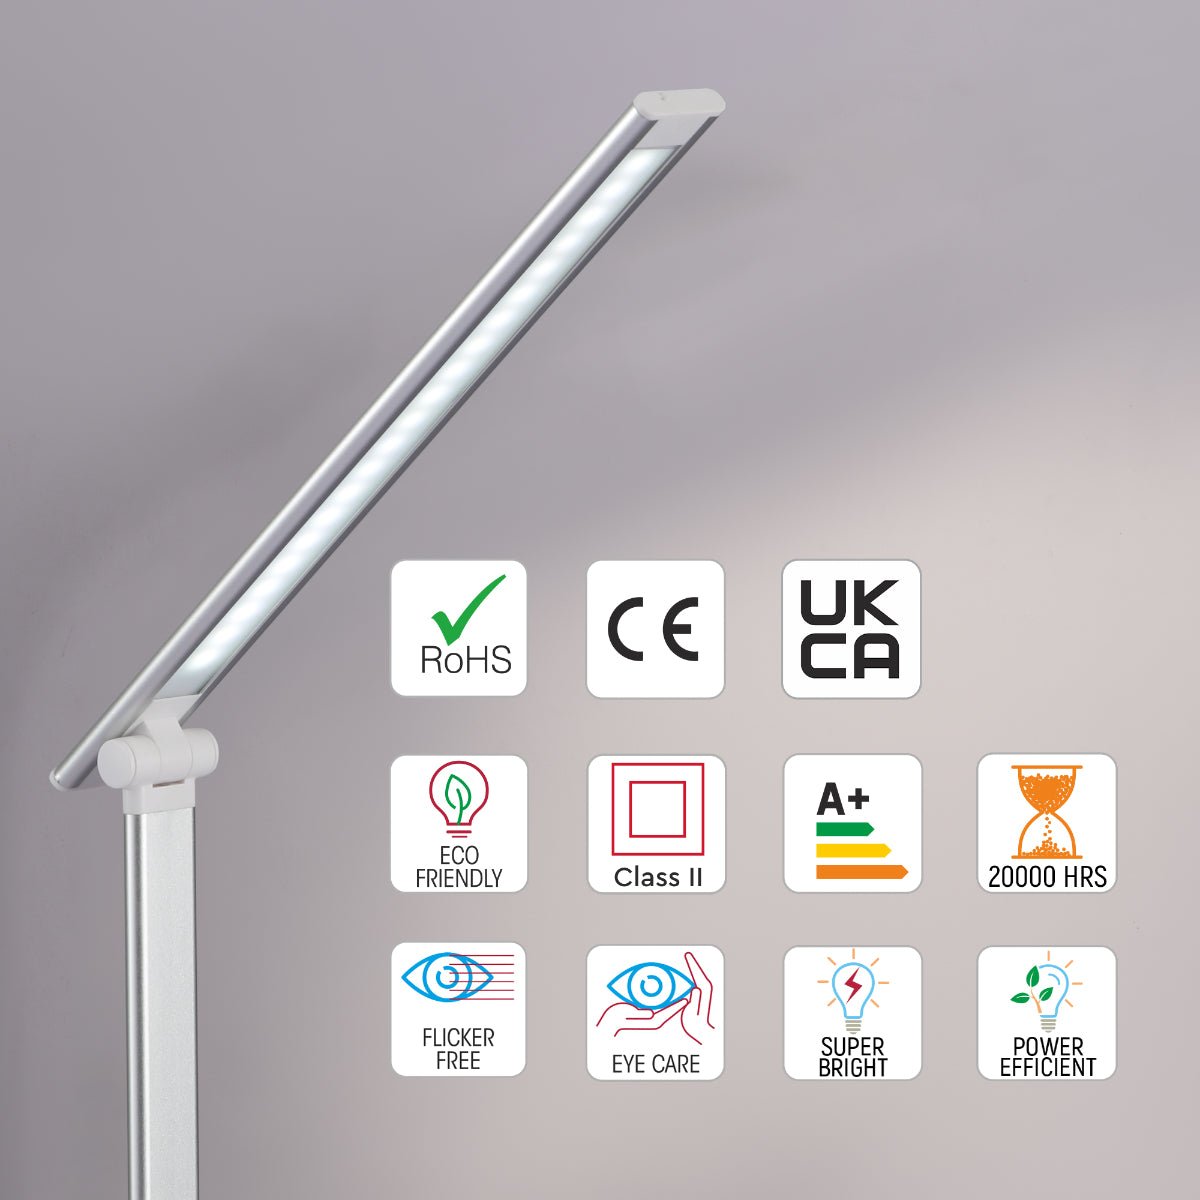 More interior usage of Dingo Silver Desk Light Dimmable and Colour Modes with Wireless Phone Charger | TEKLED 130-03612